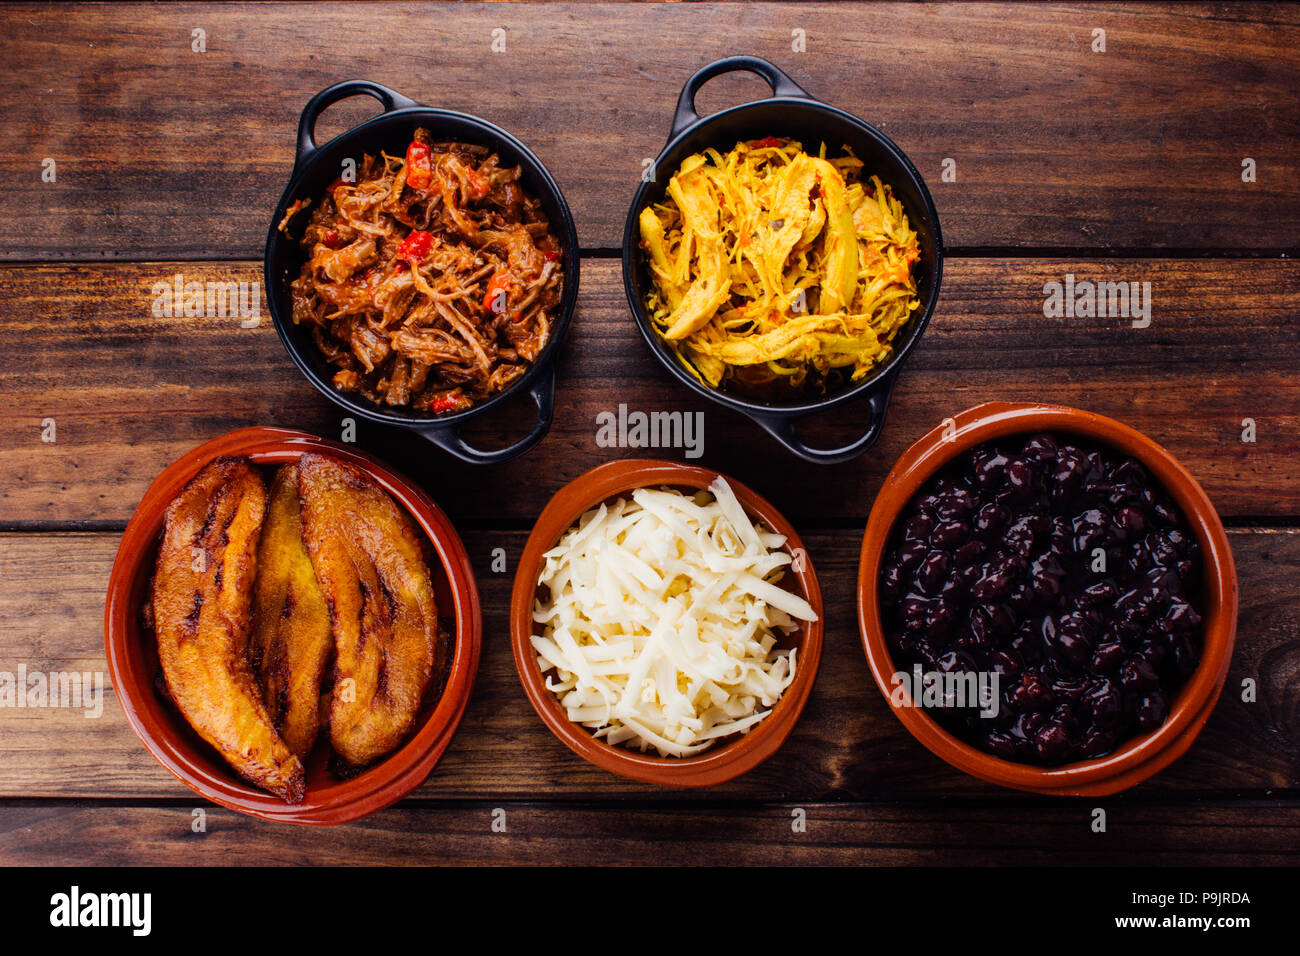 ingredients to fill Venezuelan arepas, mechada meat, chicken, black beans, fried plantain and cheese on a wooden rustic table Stock Photo